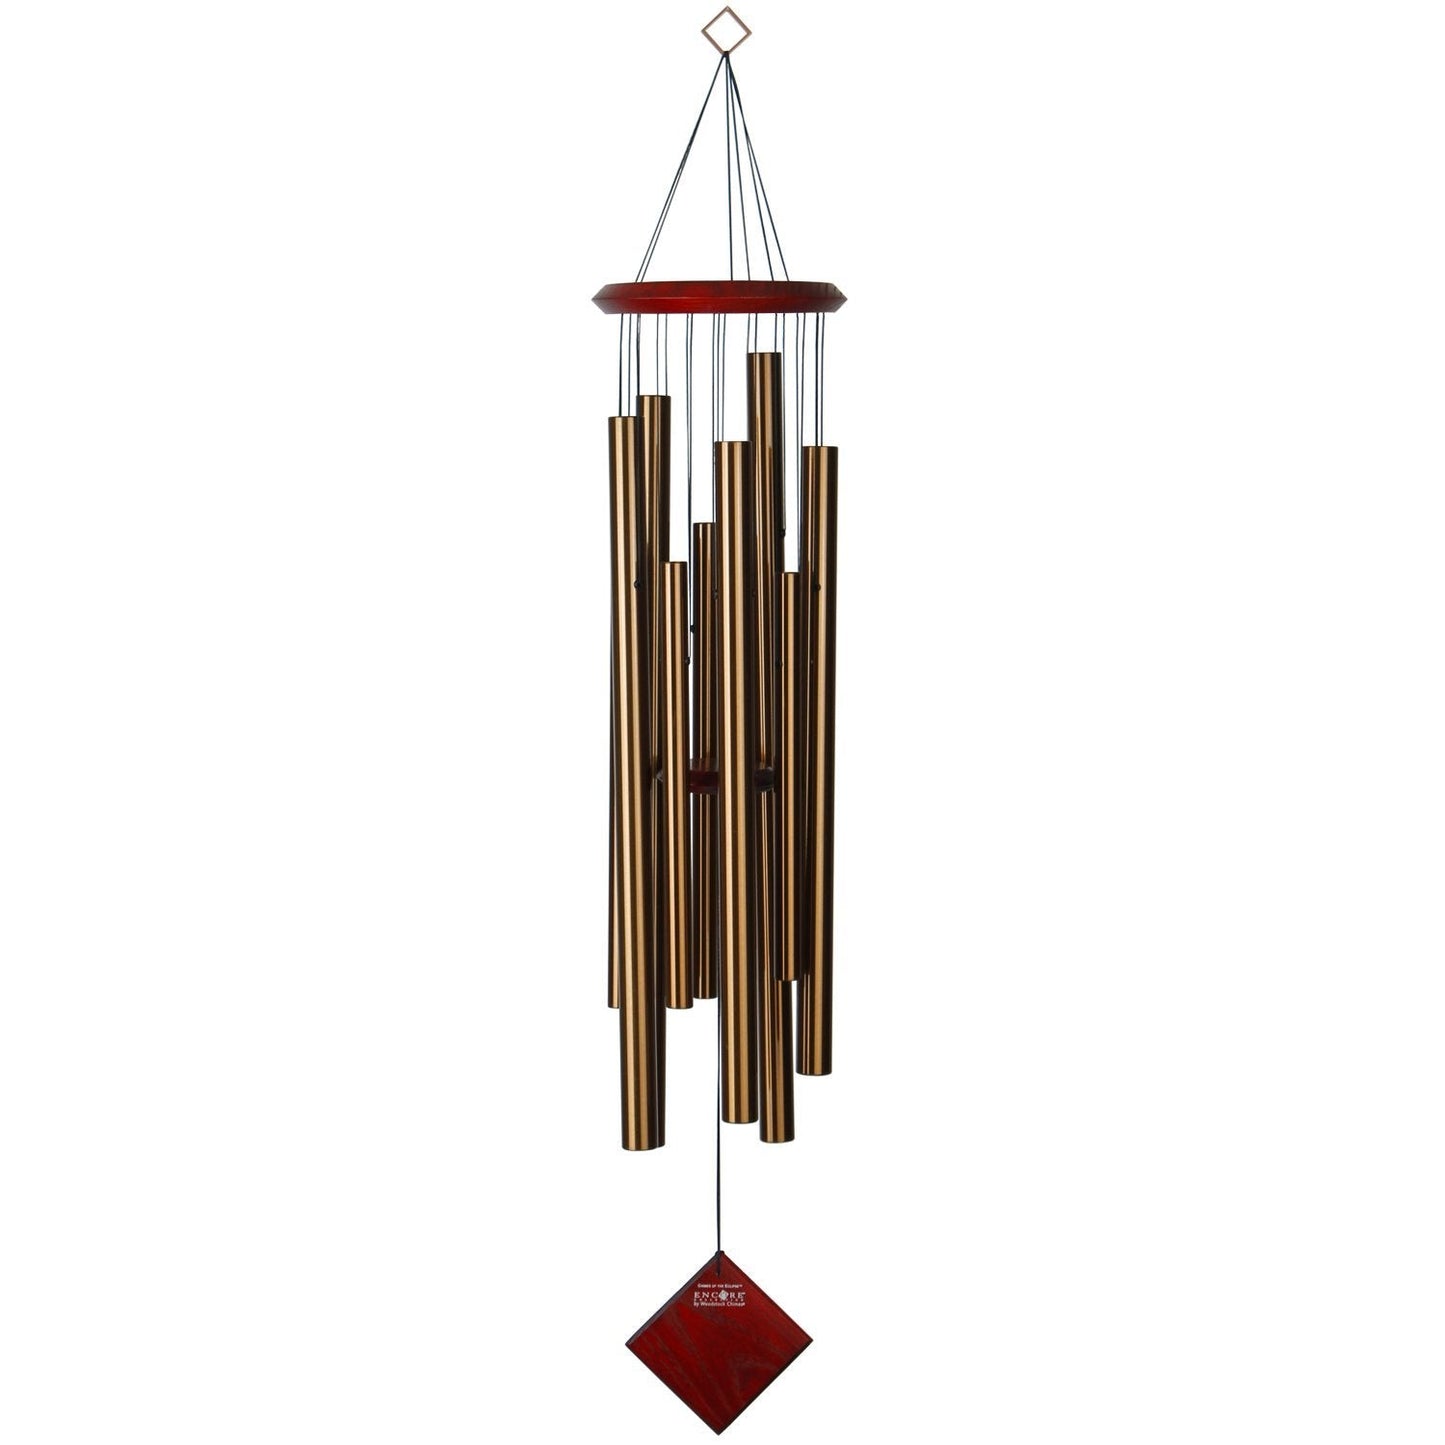 Encore® Chimes of the Eclipse - Bronze - by Woodstock Chimes